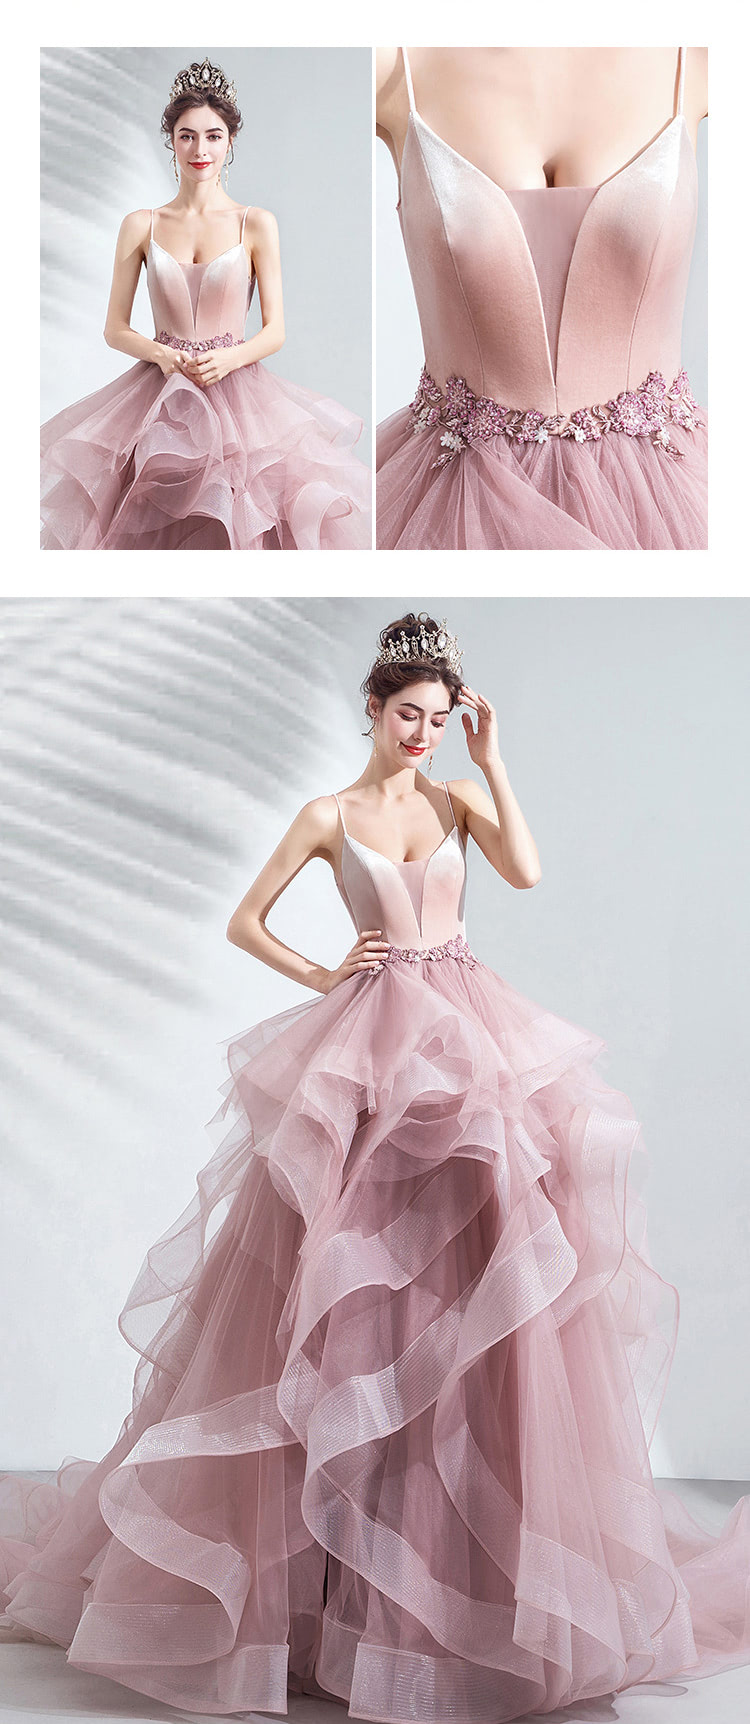 Pink-Layered-Tulle-Banquet-Prom-Party-Evening-Pompon-Skirt-Dress11